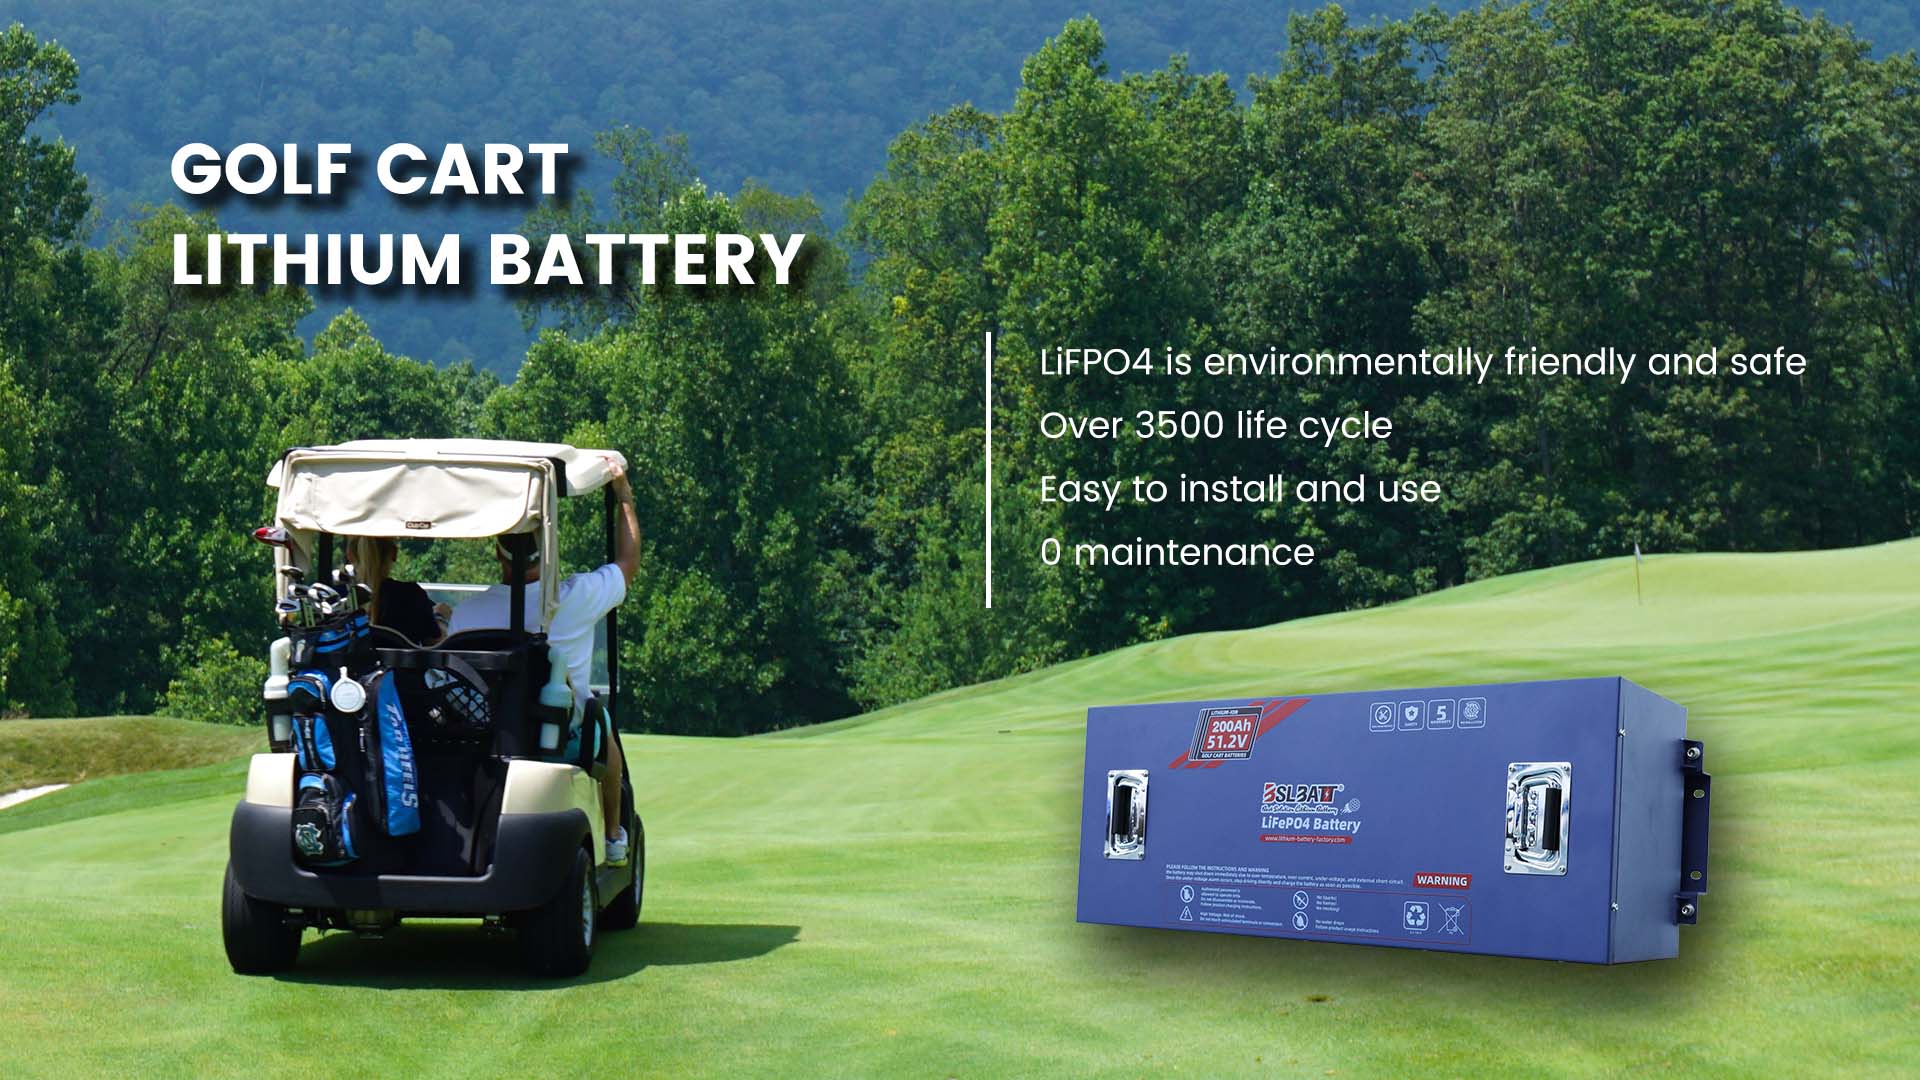 8 Things You Shouldn’t Do With Li-Ion Batteries